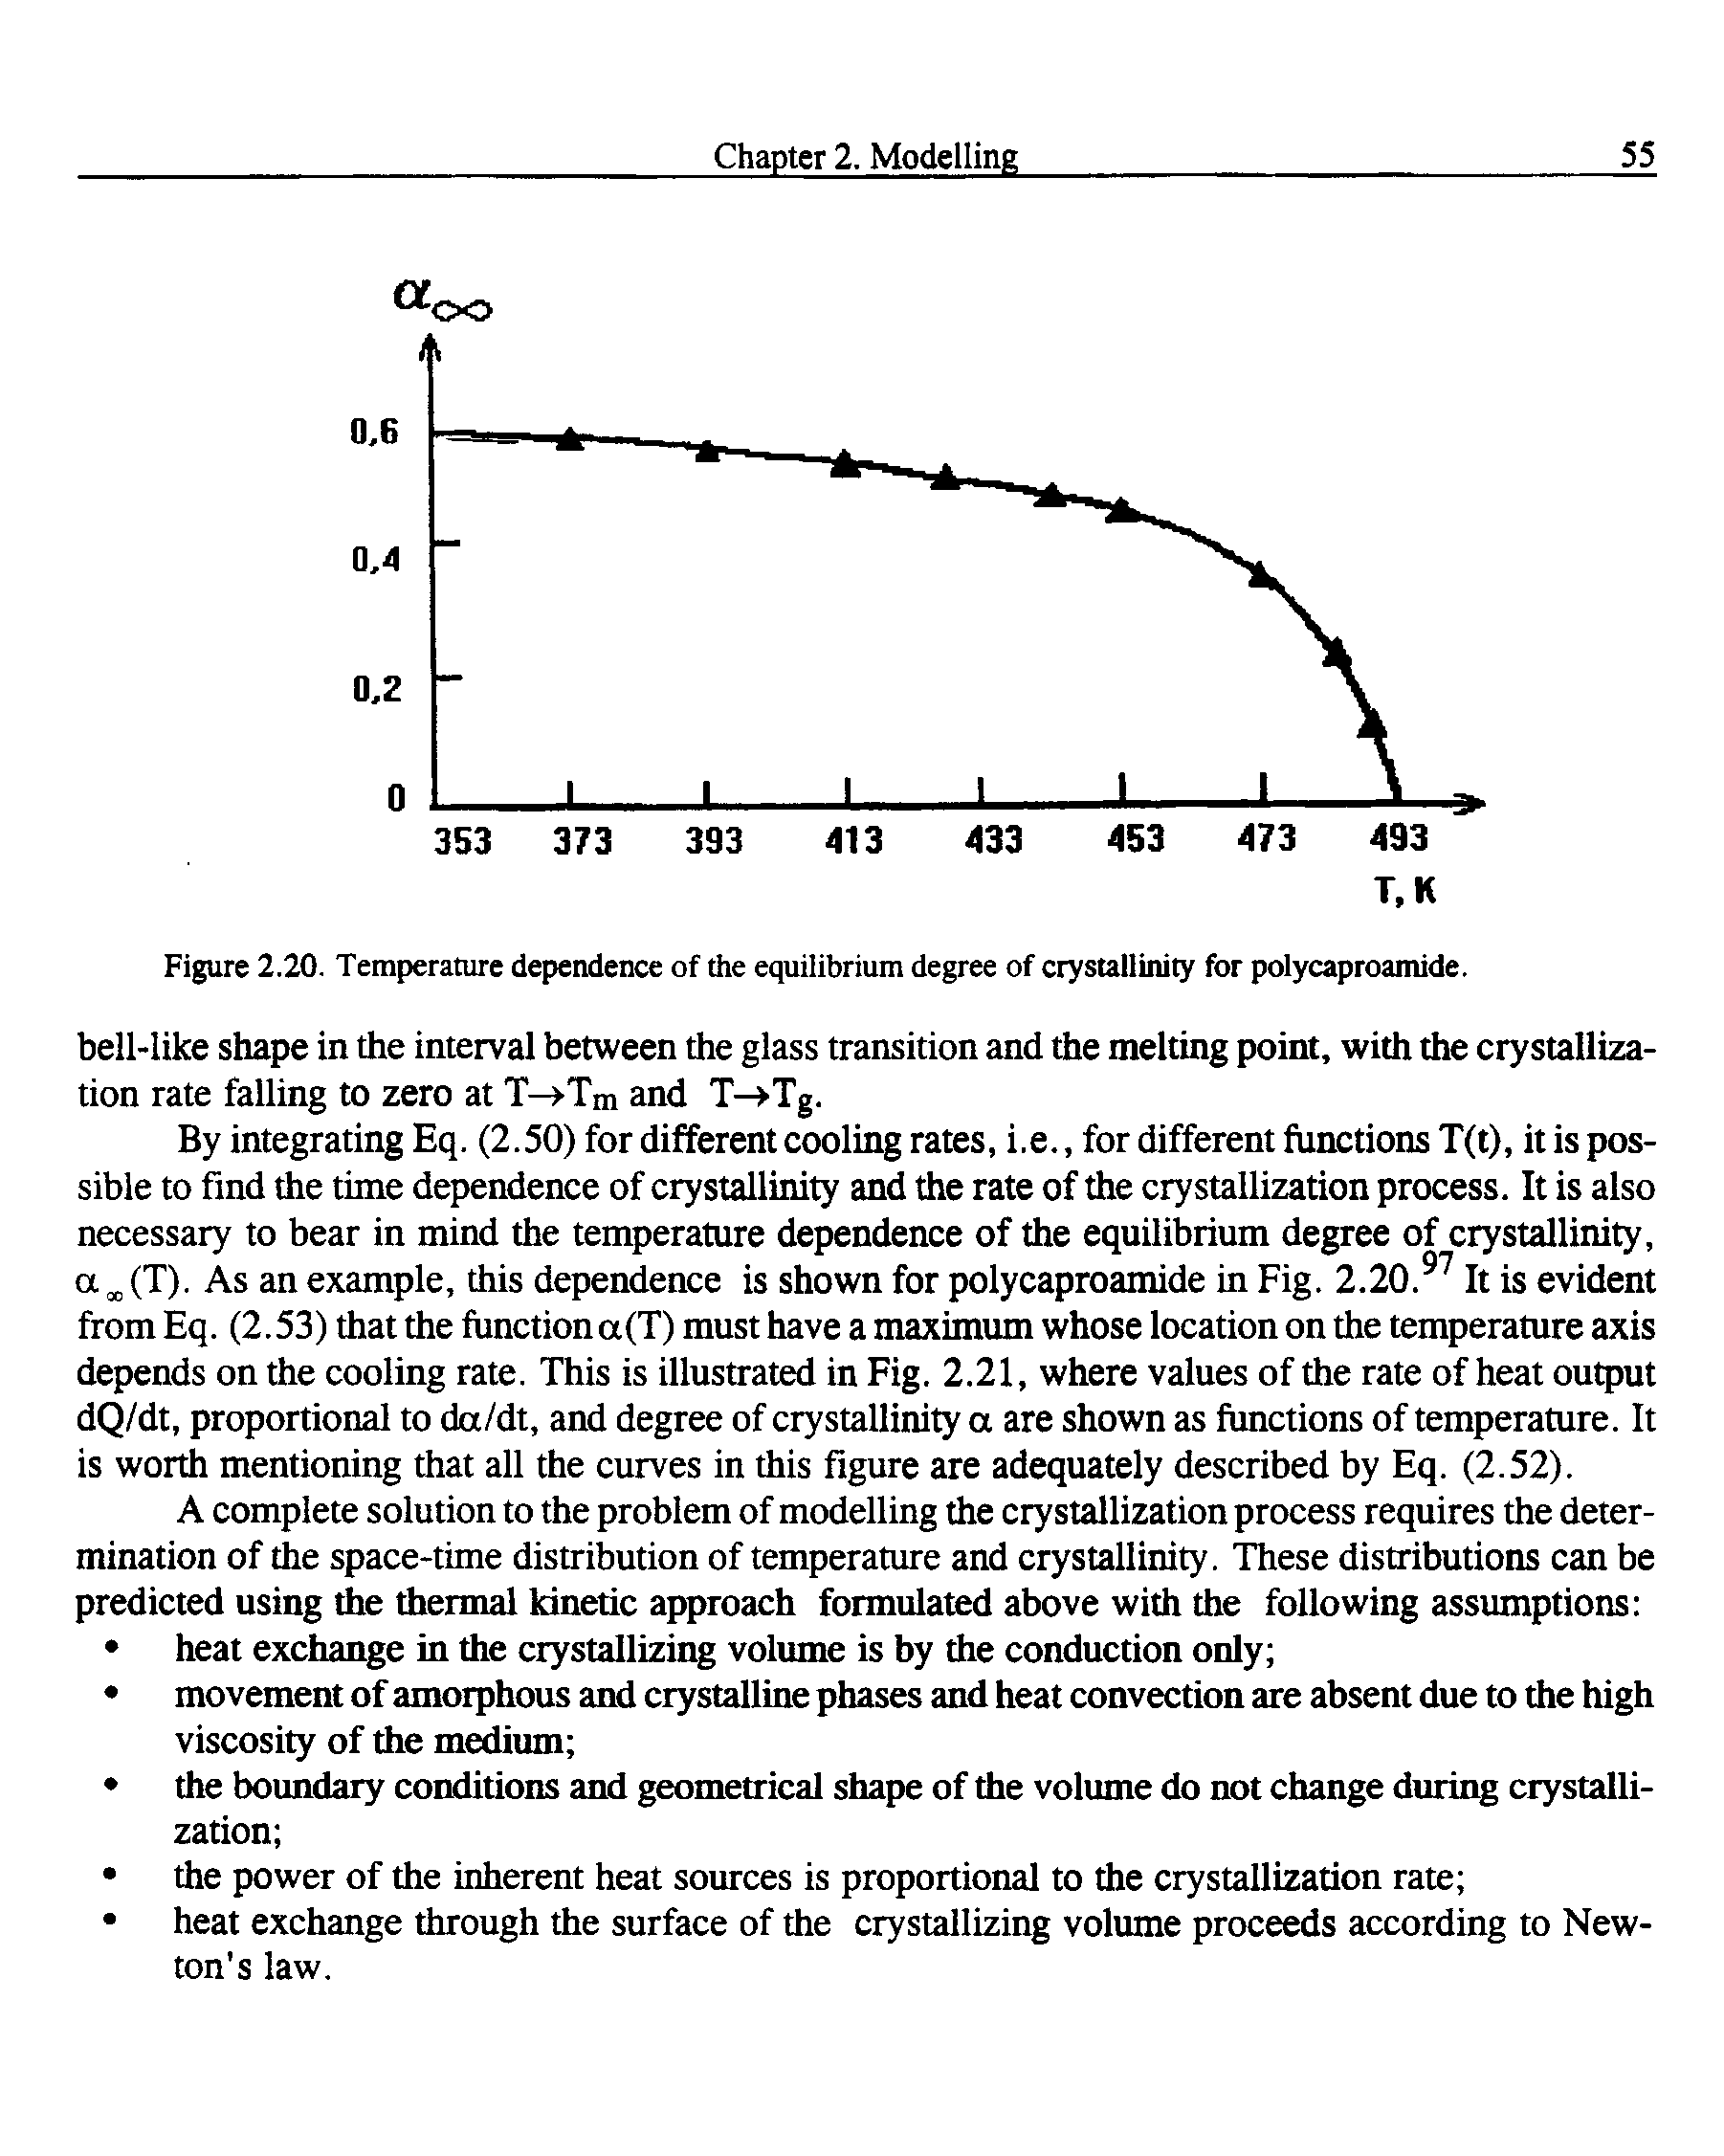 Figure 2.20. Temperature dependence of the equilibrium degree of crystallinity for polycaproamide.